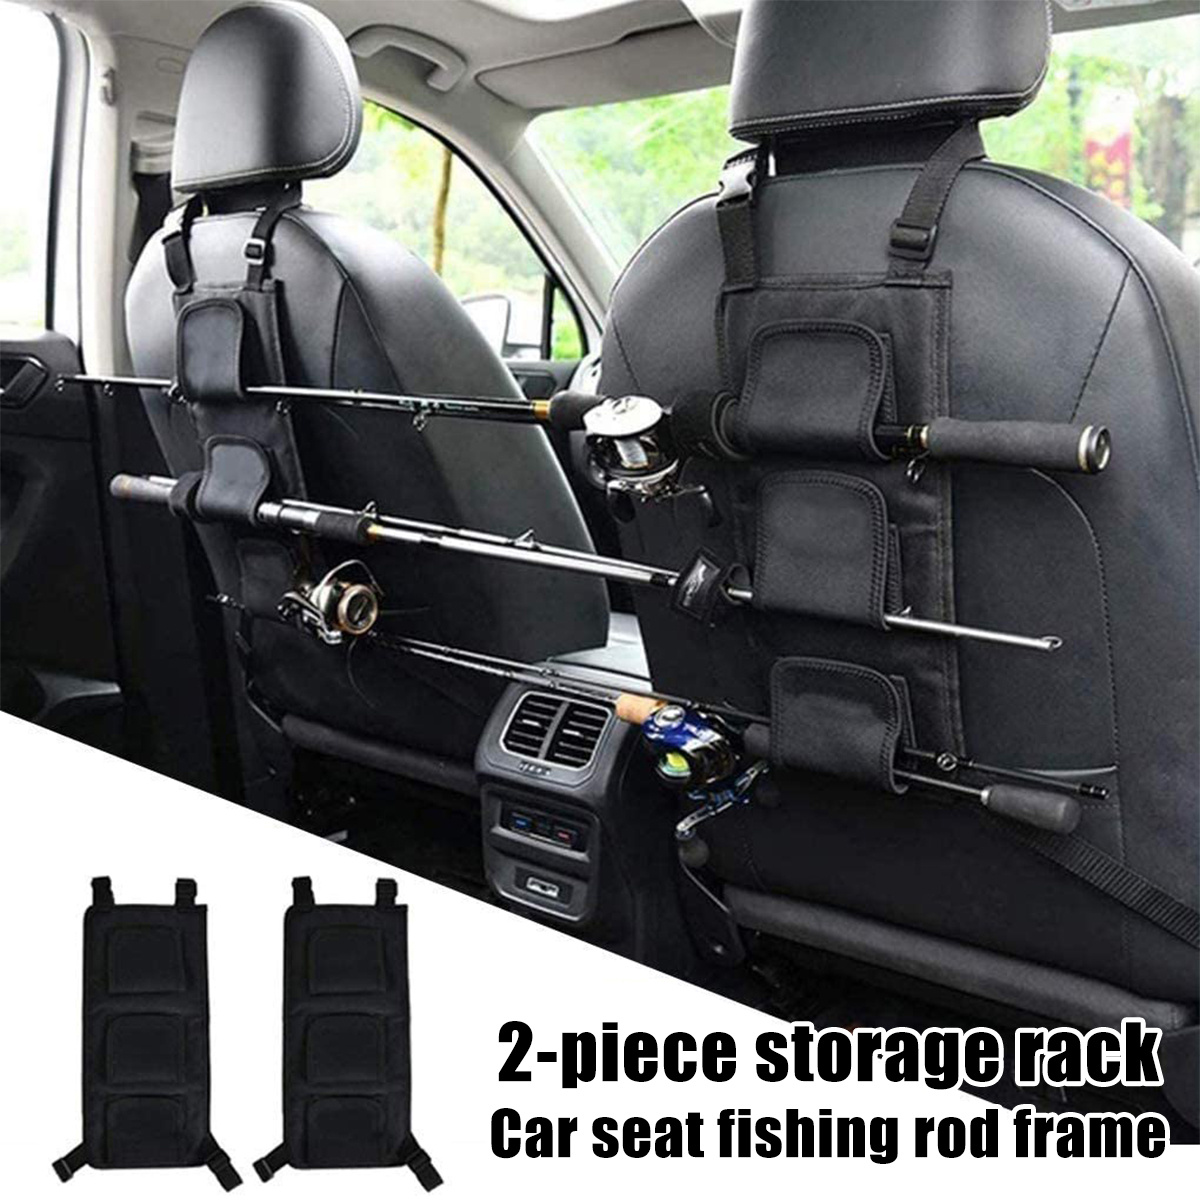 Car/Truck/SUV Suction Cup Fishing Rod Holders Storage Rack 1 Pair